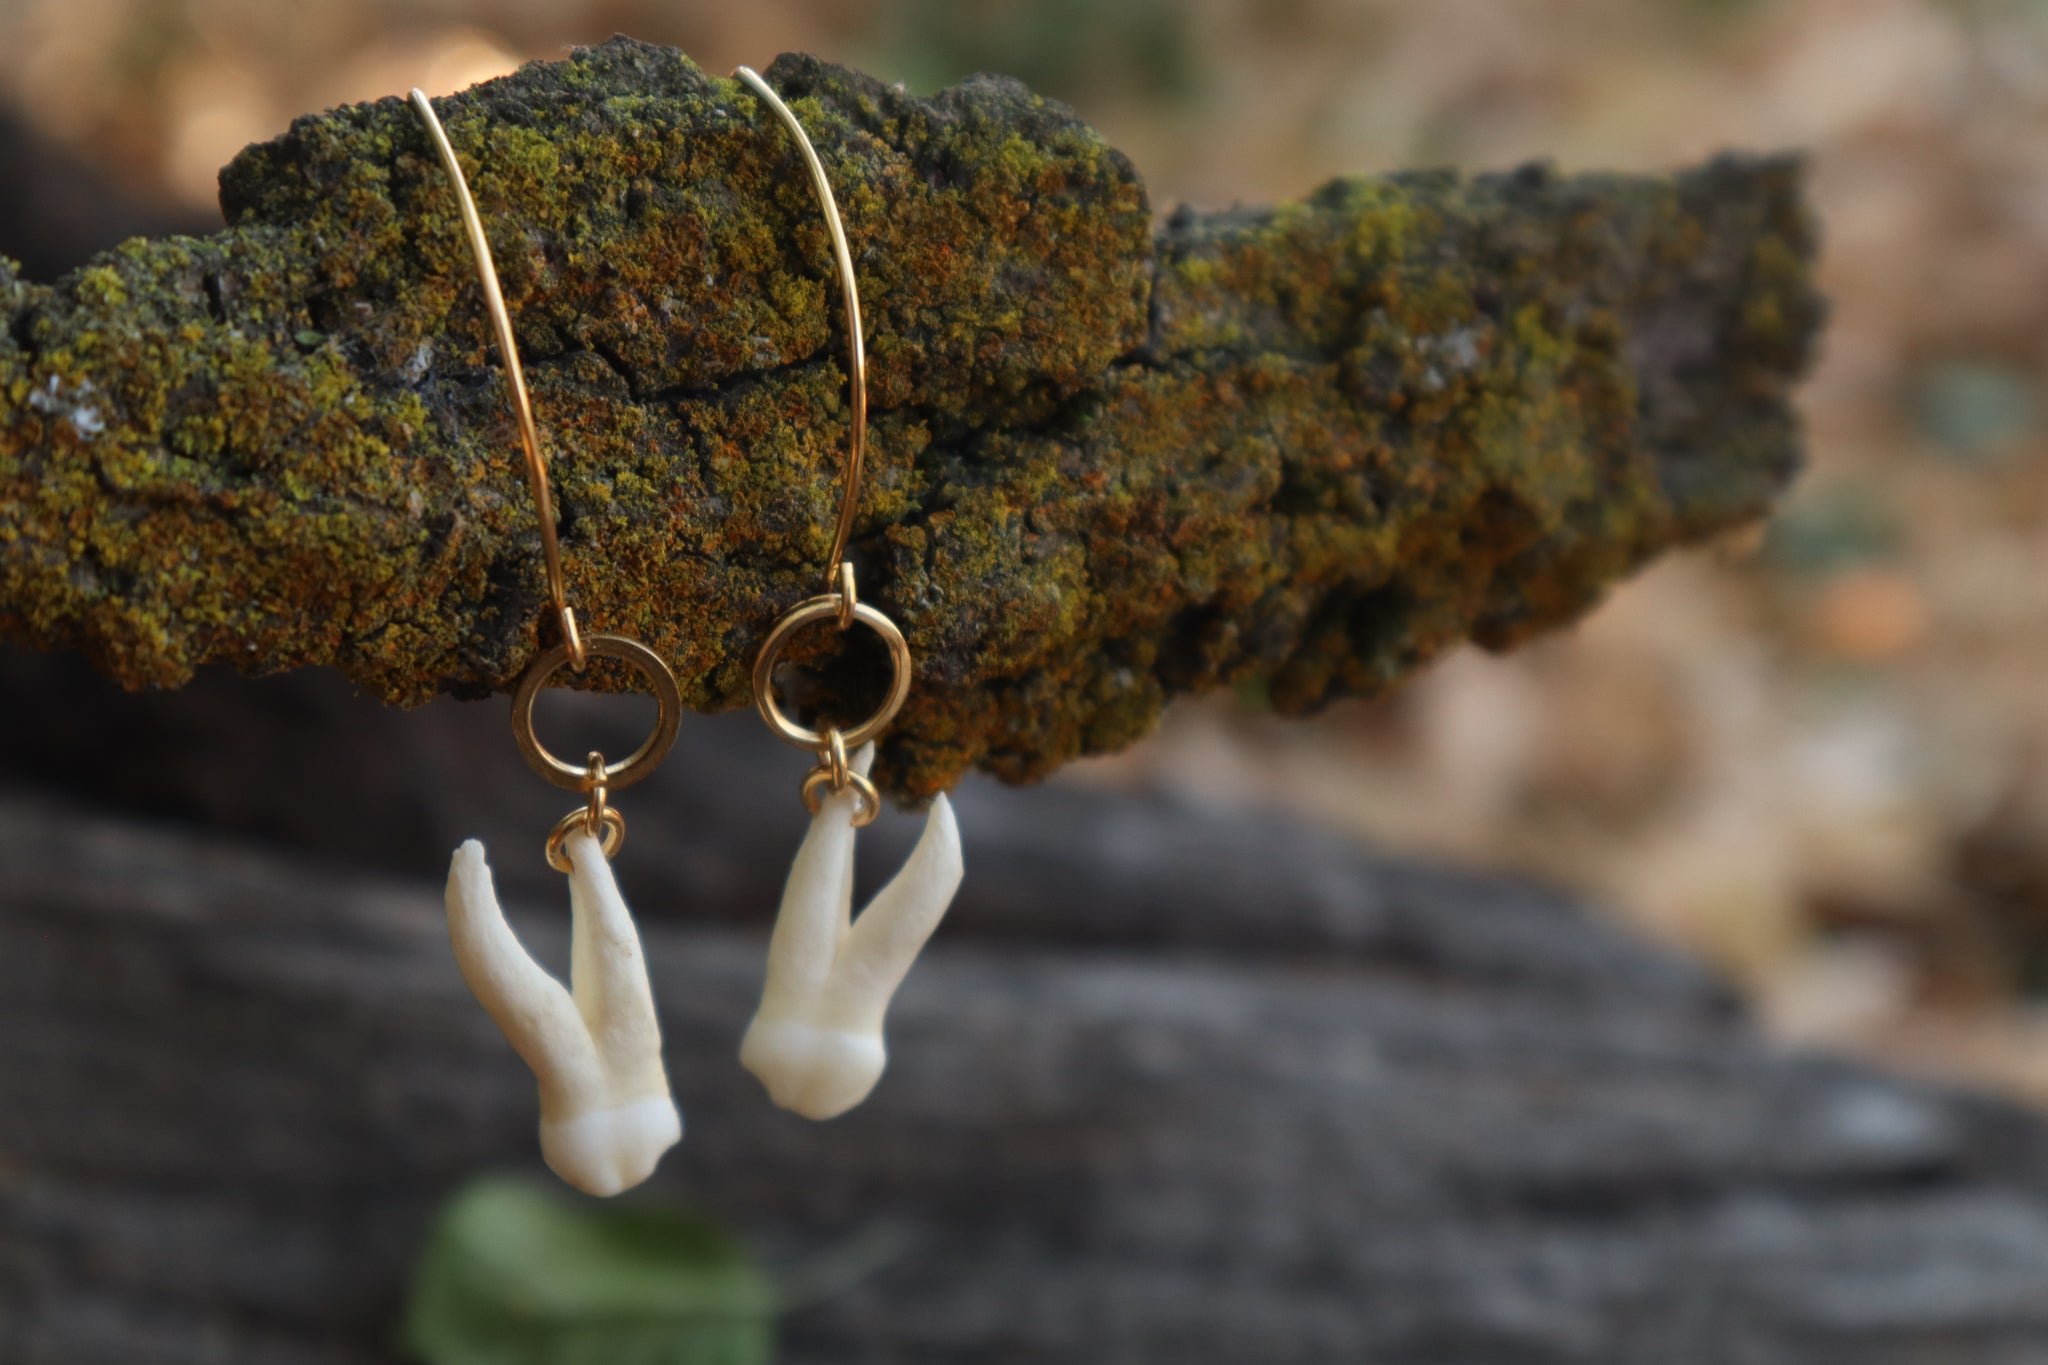 Pig Tooth Earrings - 10k Gold Plated